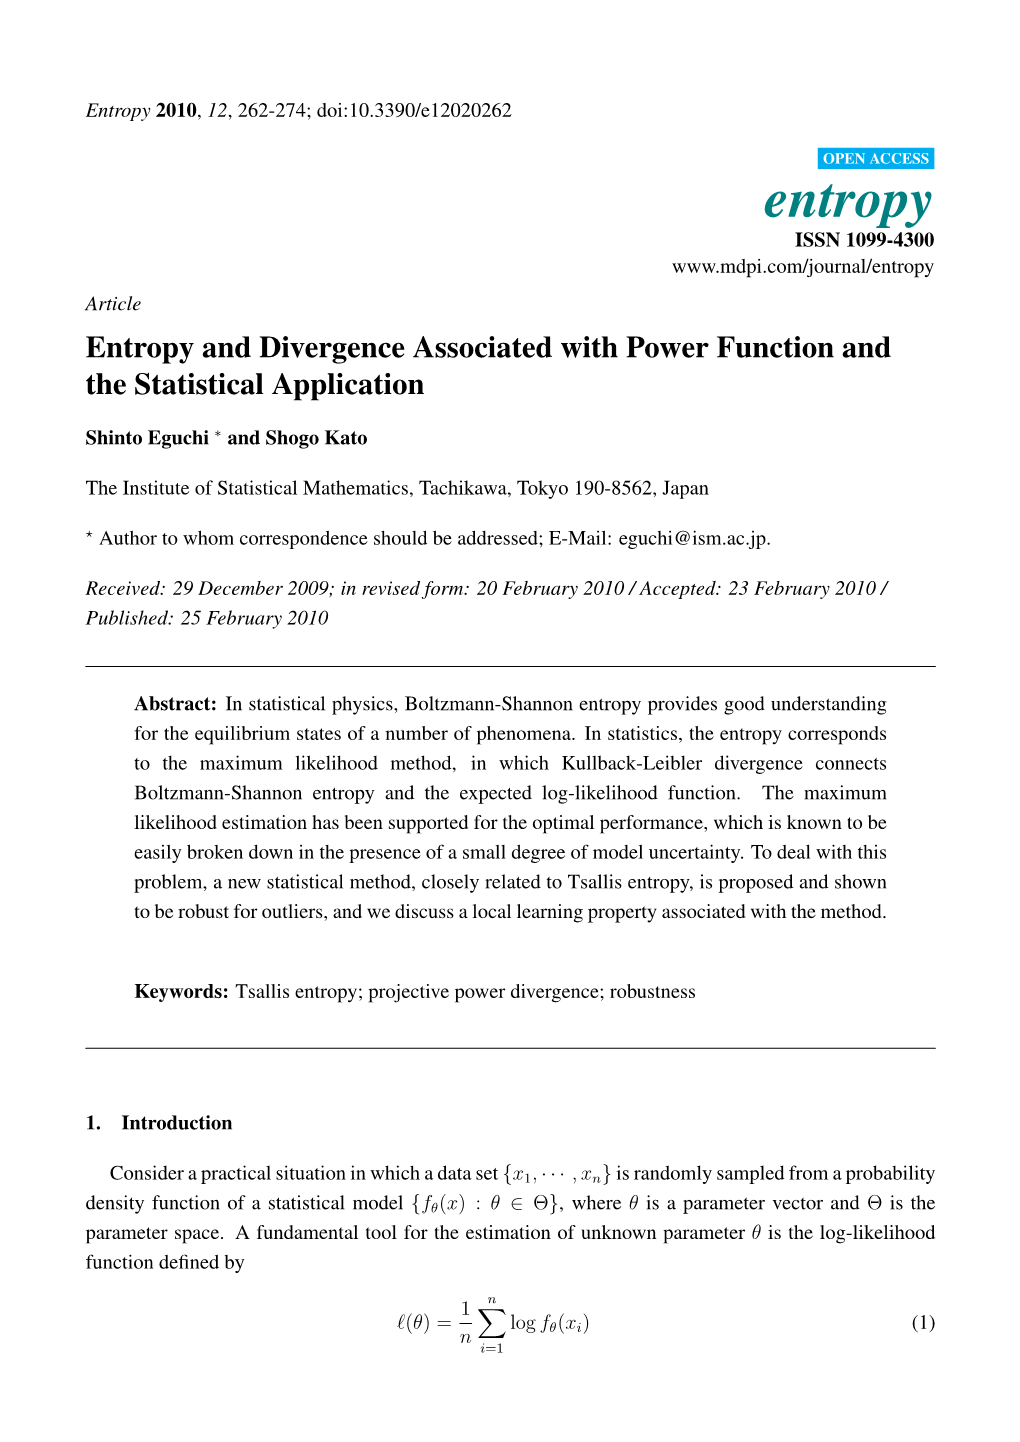 Entropy and Divergence Associated with Power Function and the Statistical Application